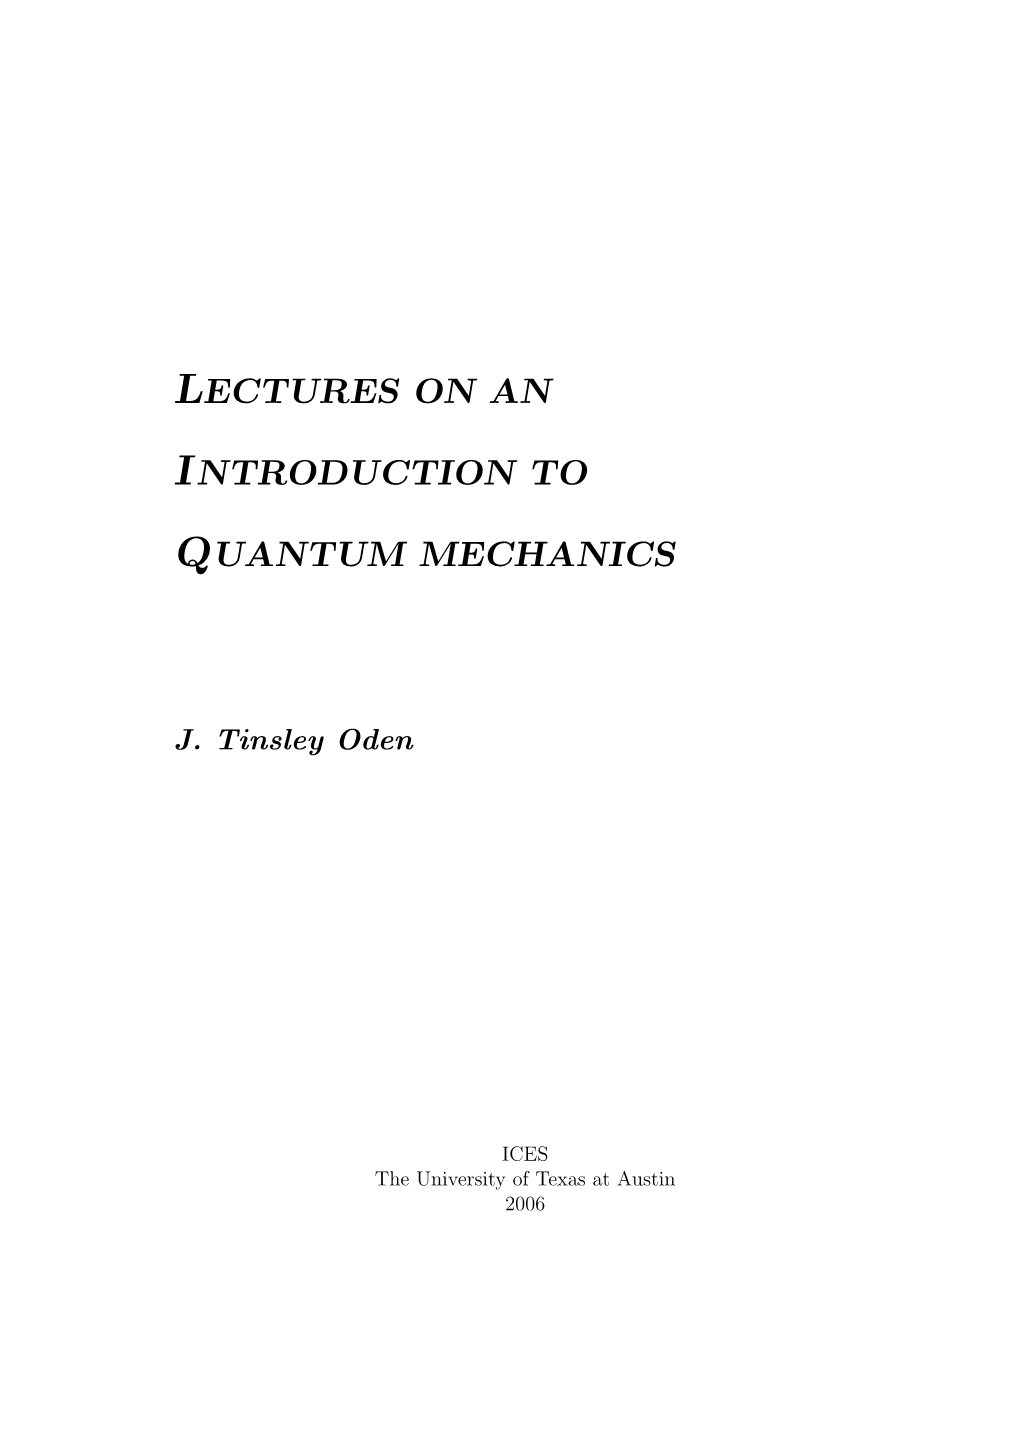 Lectures on an Introduction to Quantum Mechanics